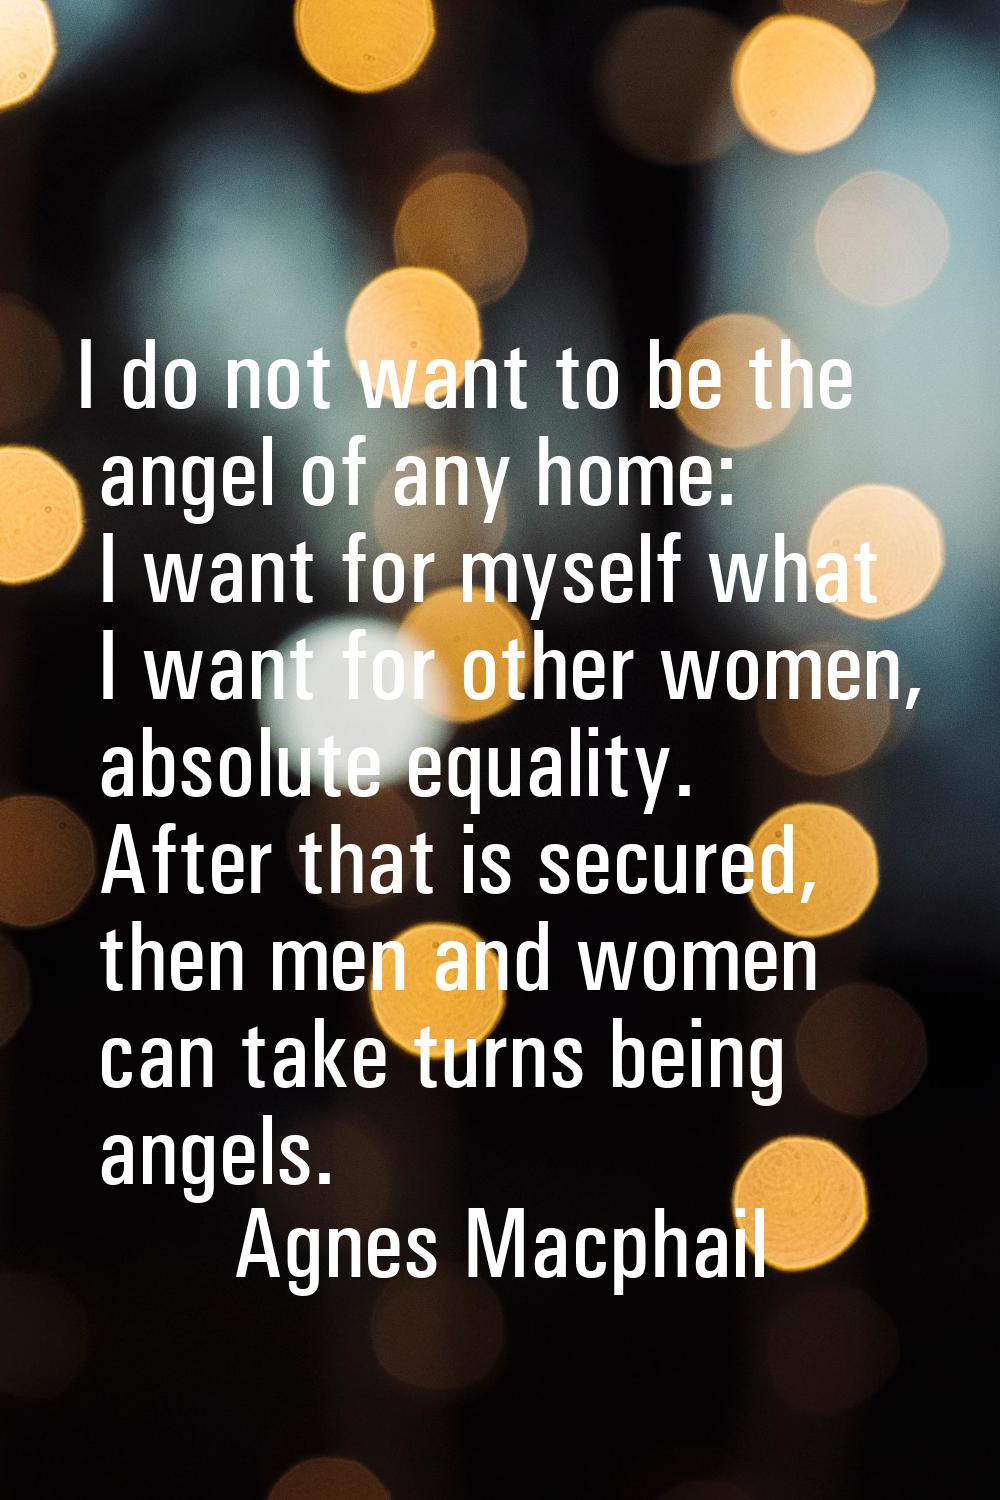 I do not want to be the angel of any home: I want for myself what I want for other women, absolute 